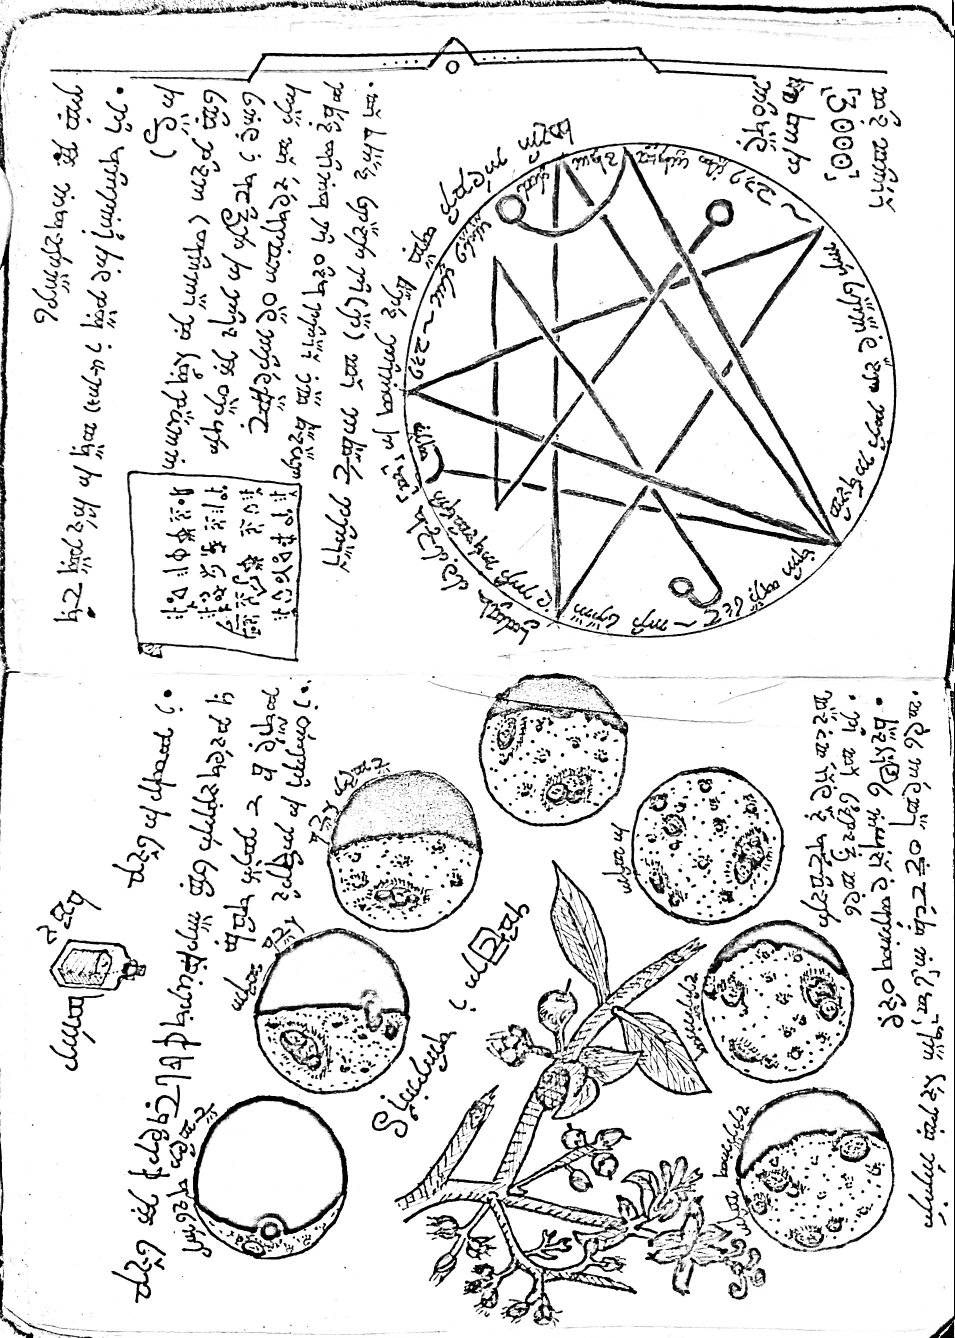 fanart Script lovecraftian eldritch Drawing  dnd Dungeons and Dragons fantasy art props ink